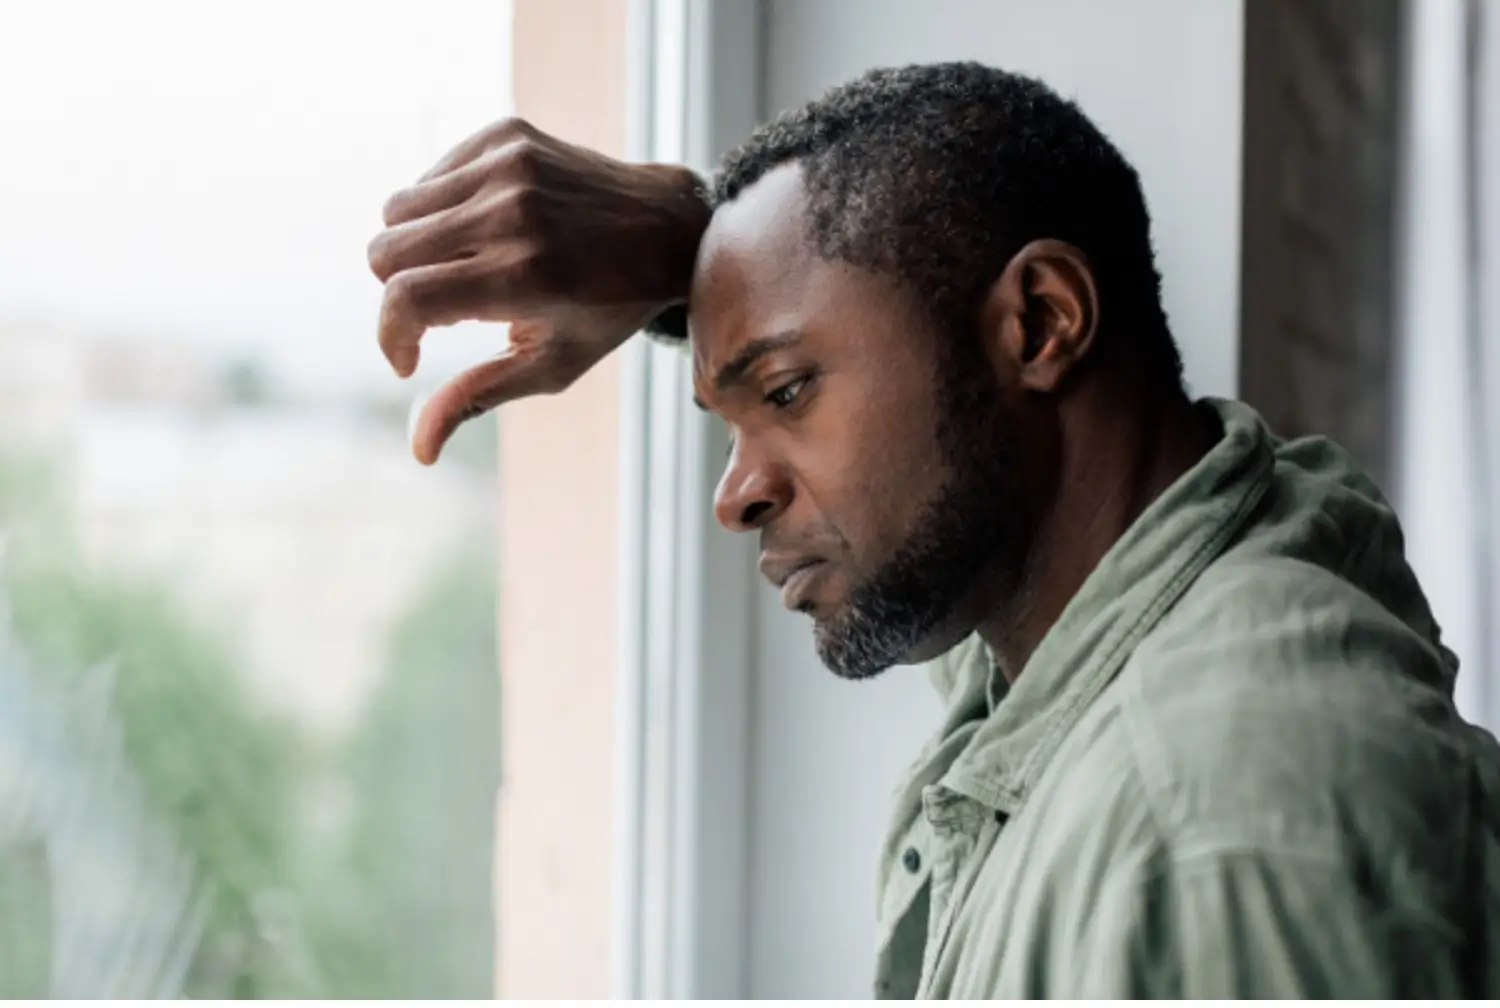 Man going through Paxil withdrawal looks out window with depressed look on his face